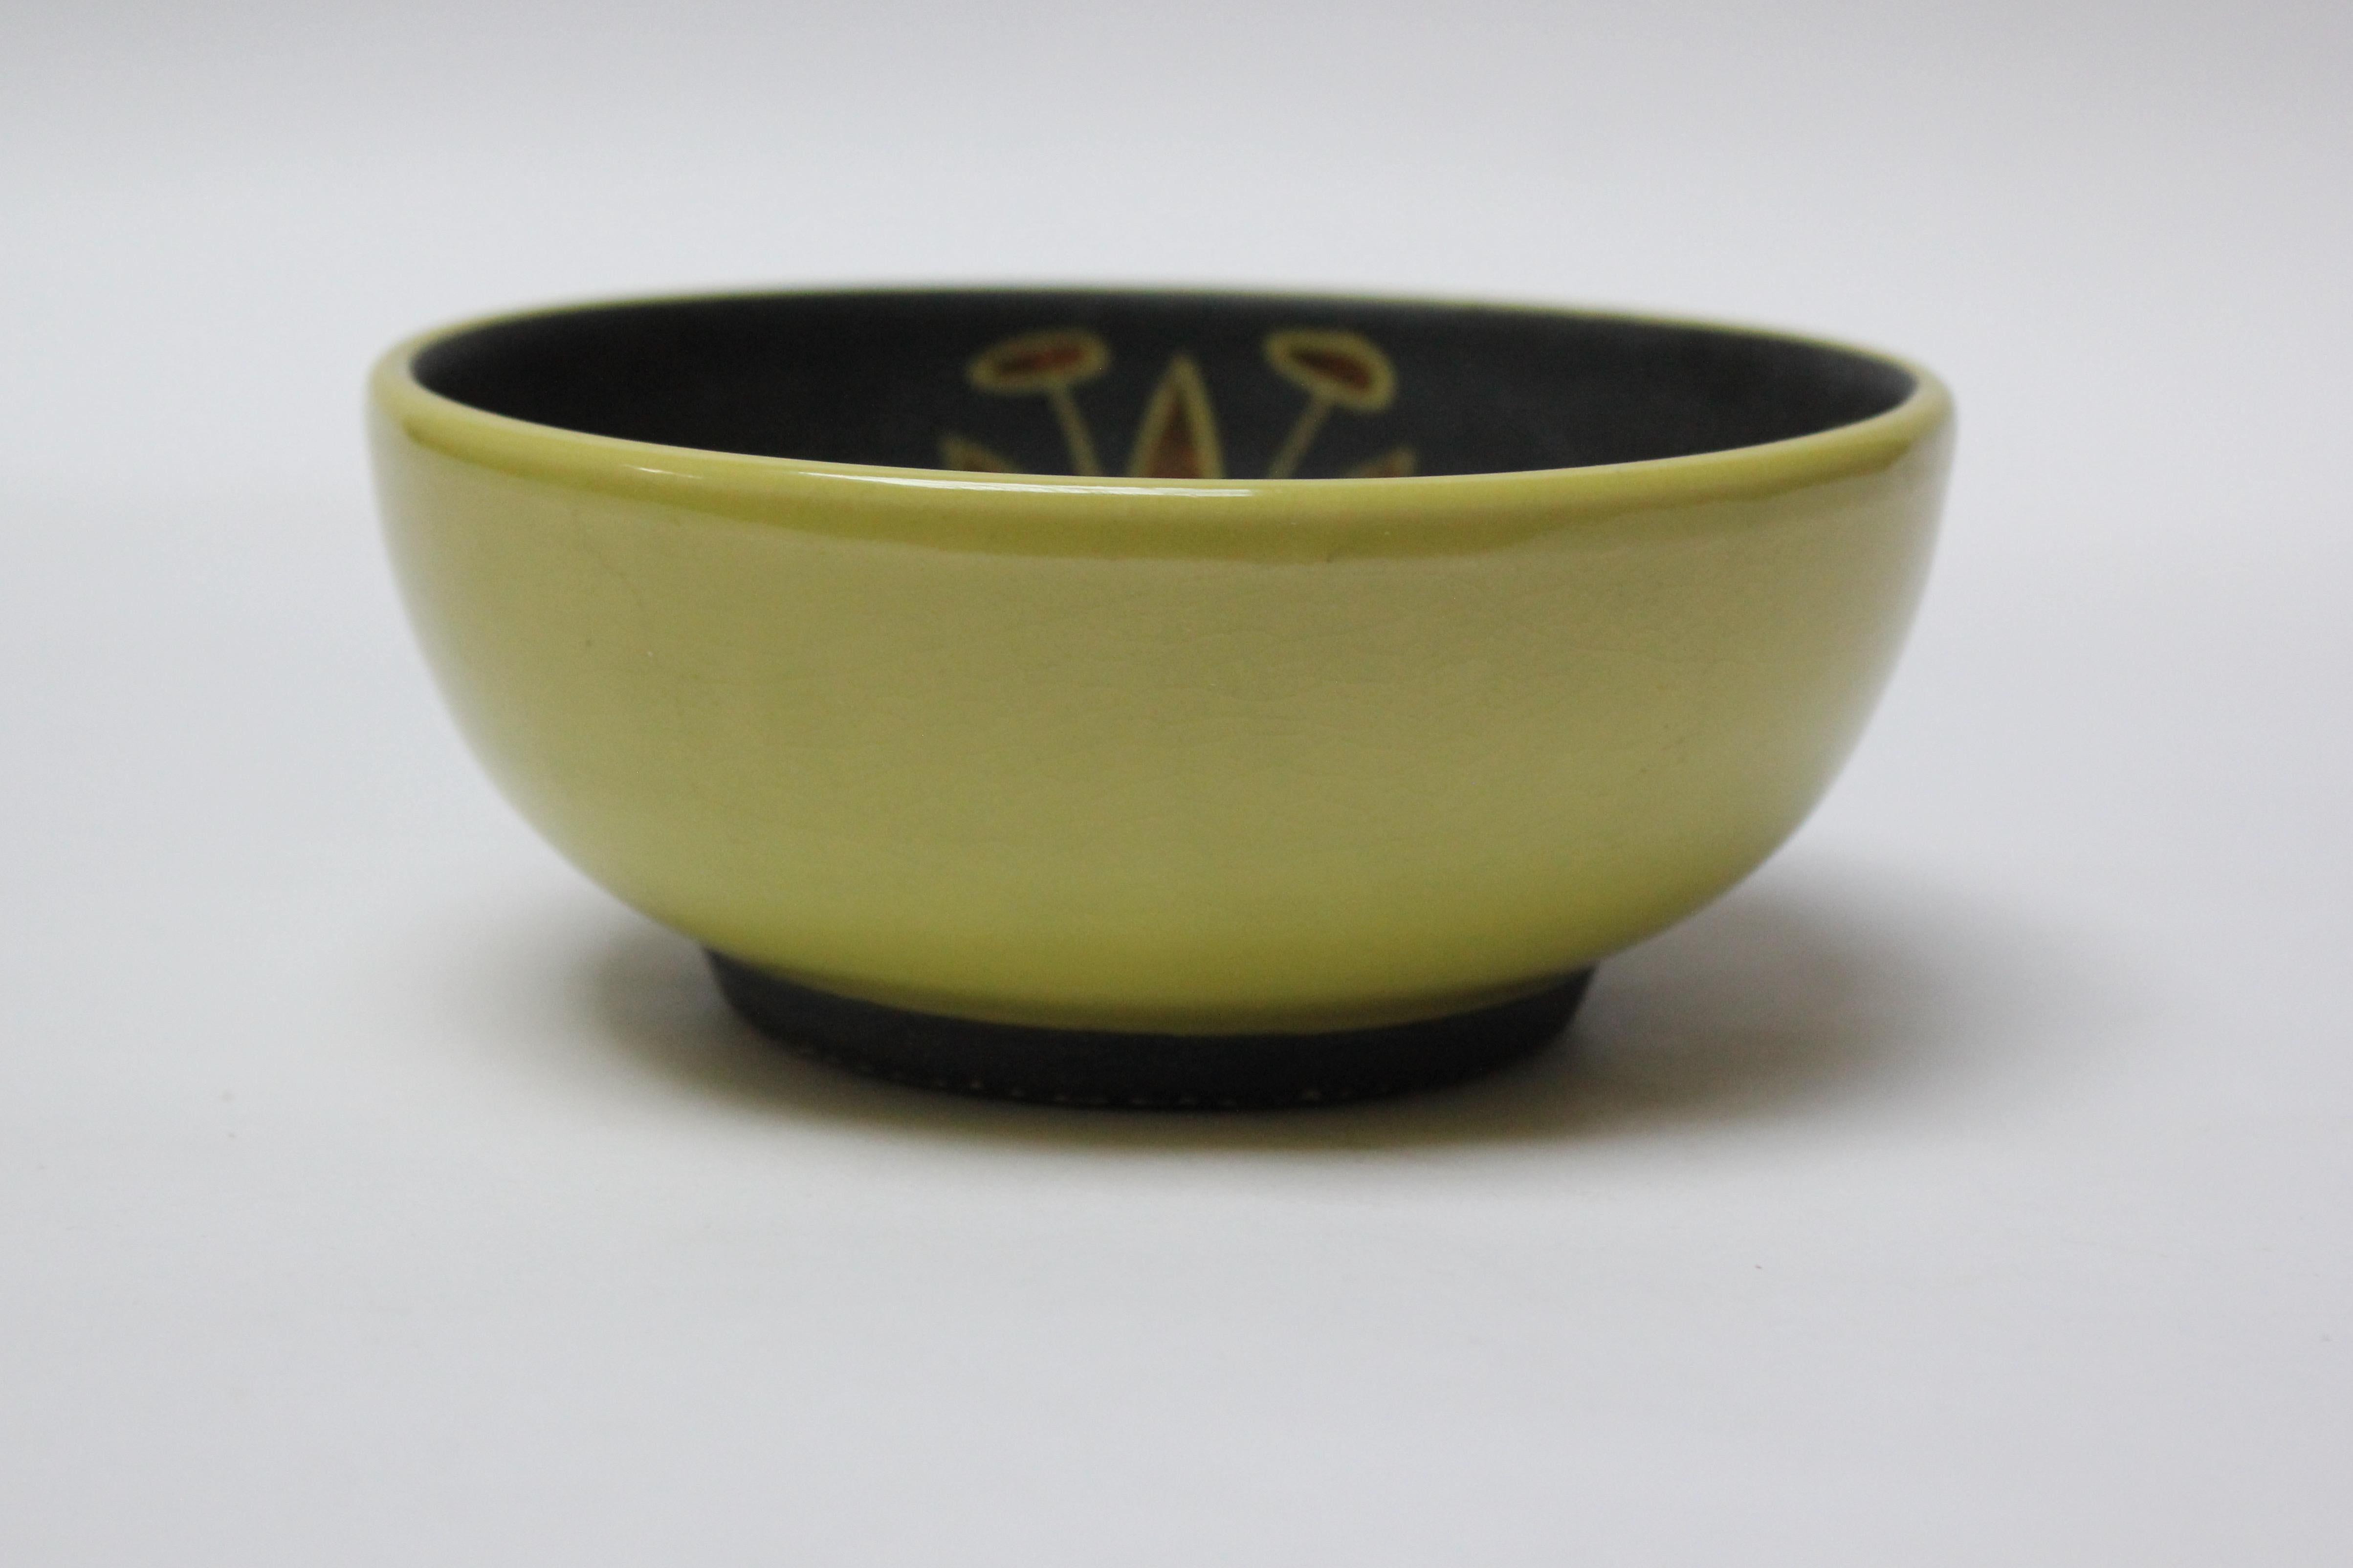 American Small Art Deco Chartreuse and Gold Leaf Ceramic Bowl by Waylande Gregory